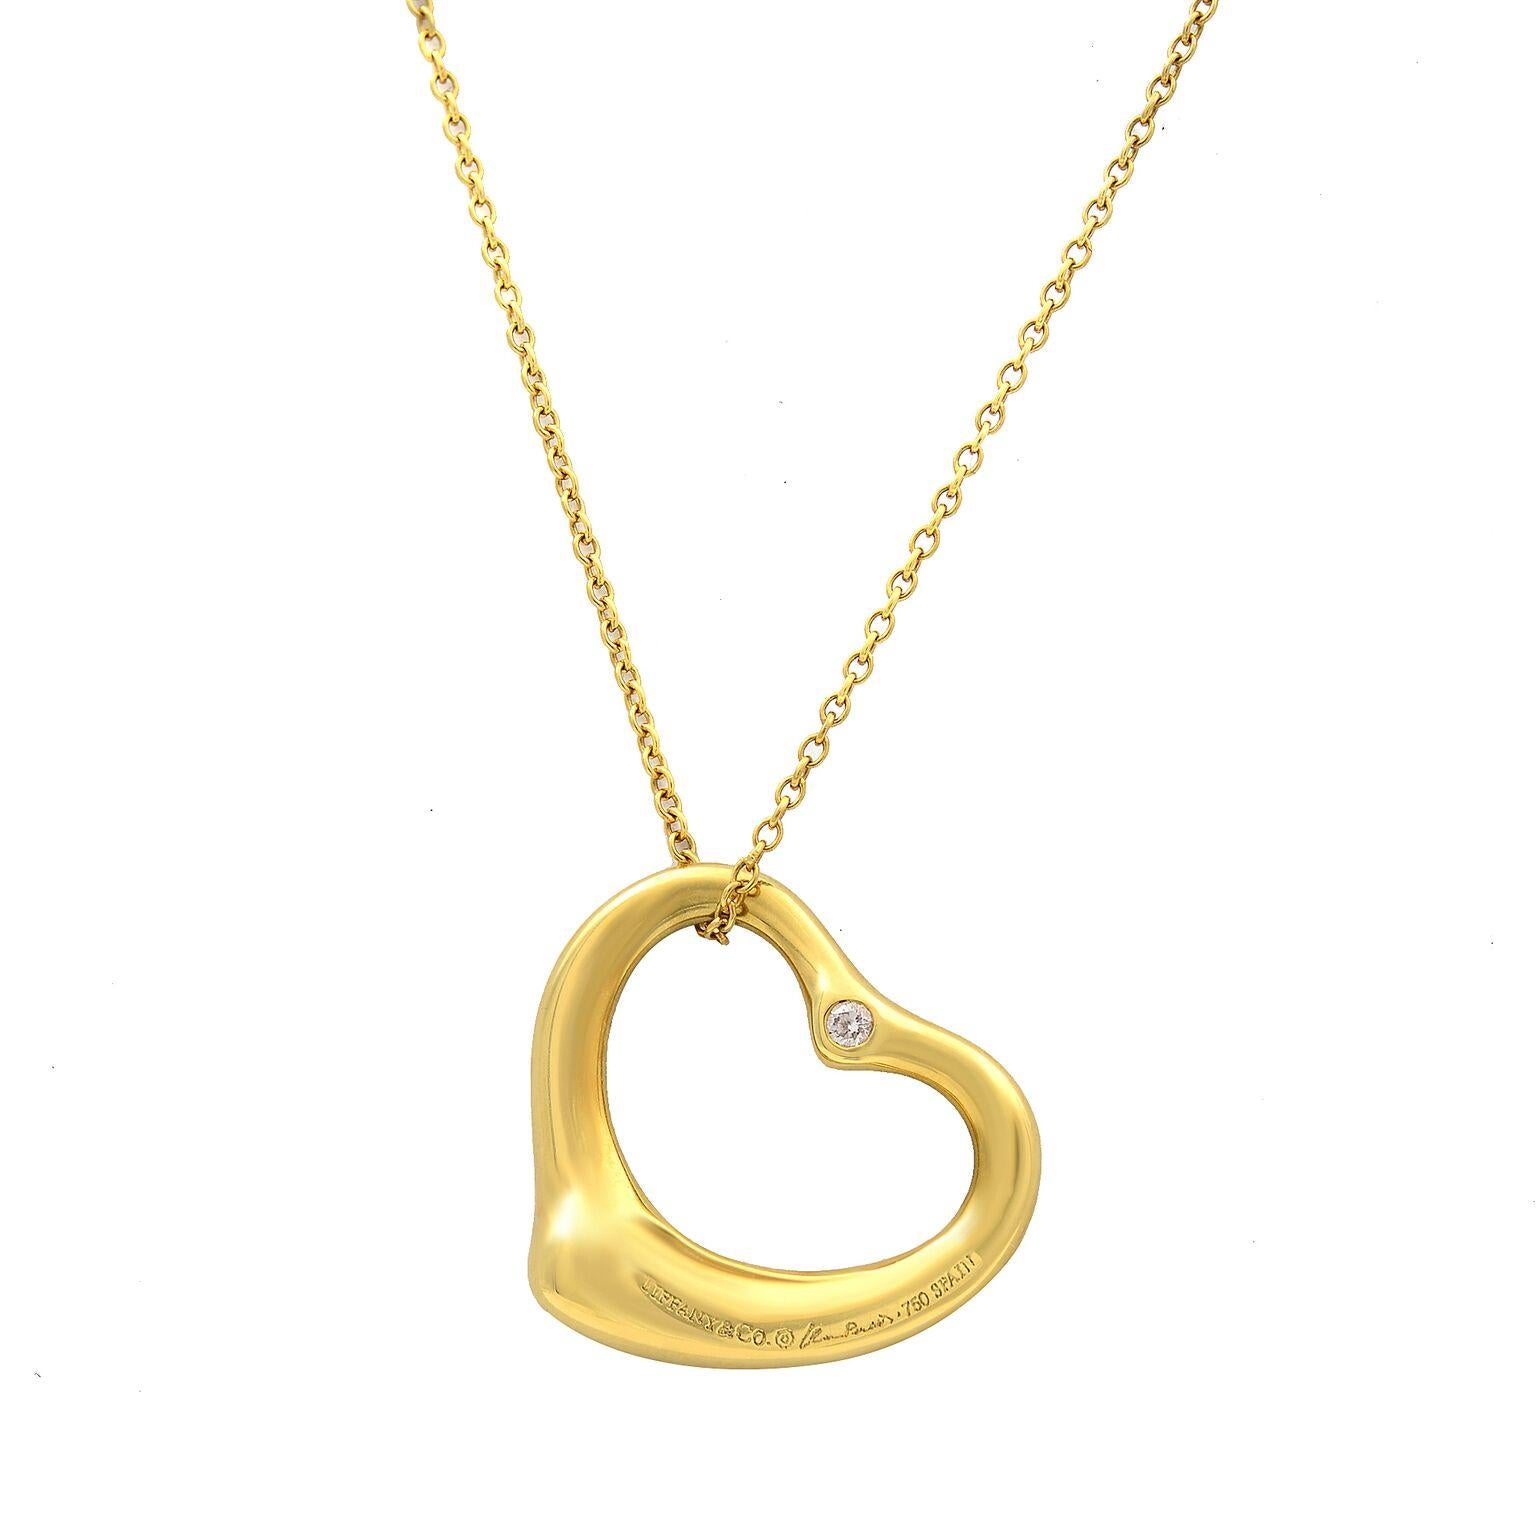 Tiffany and Co. diamond and 18K yellow gold necklace from he Elsa Peretti Open Heart collection. This 24.4 inch long necklace features 8 grams of 18 karat yellow gold. Two bezel set diamonds adorn the top of the heart pendant, one set on each side.